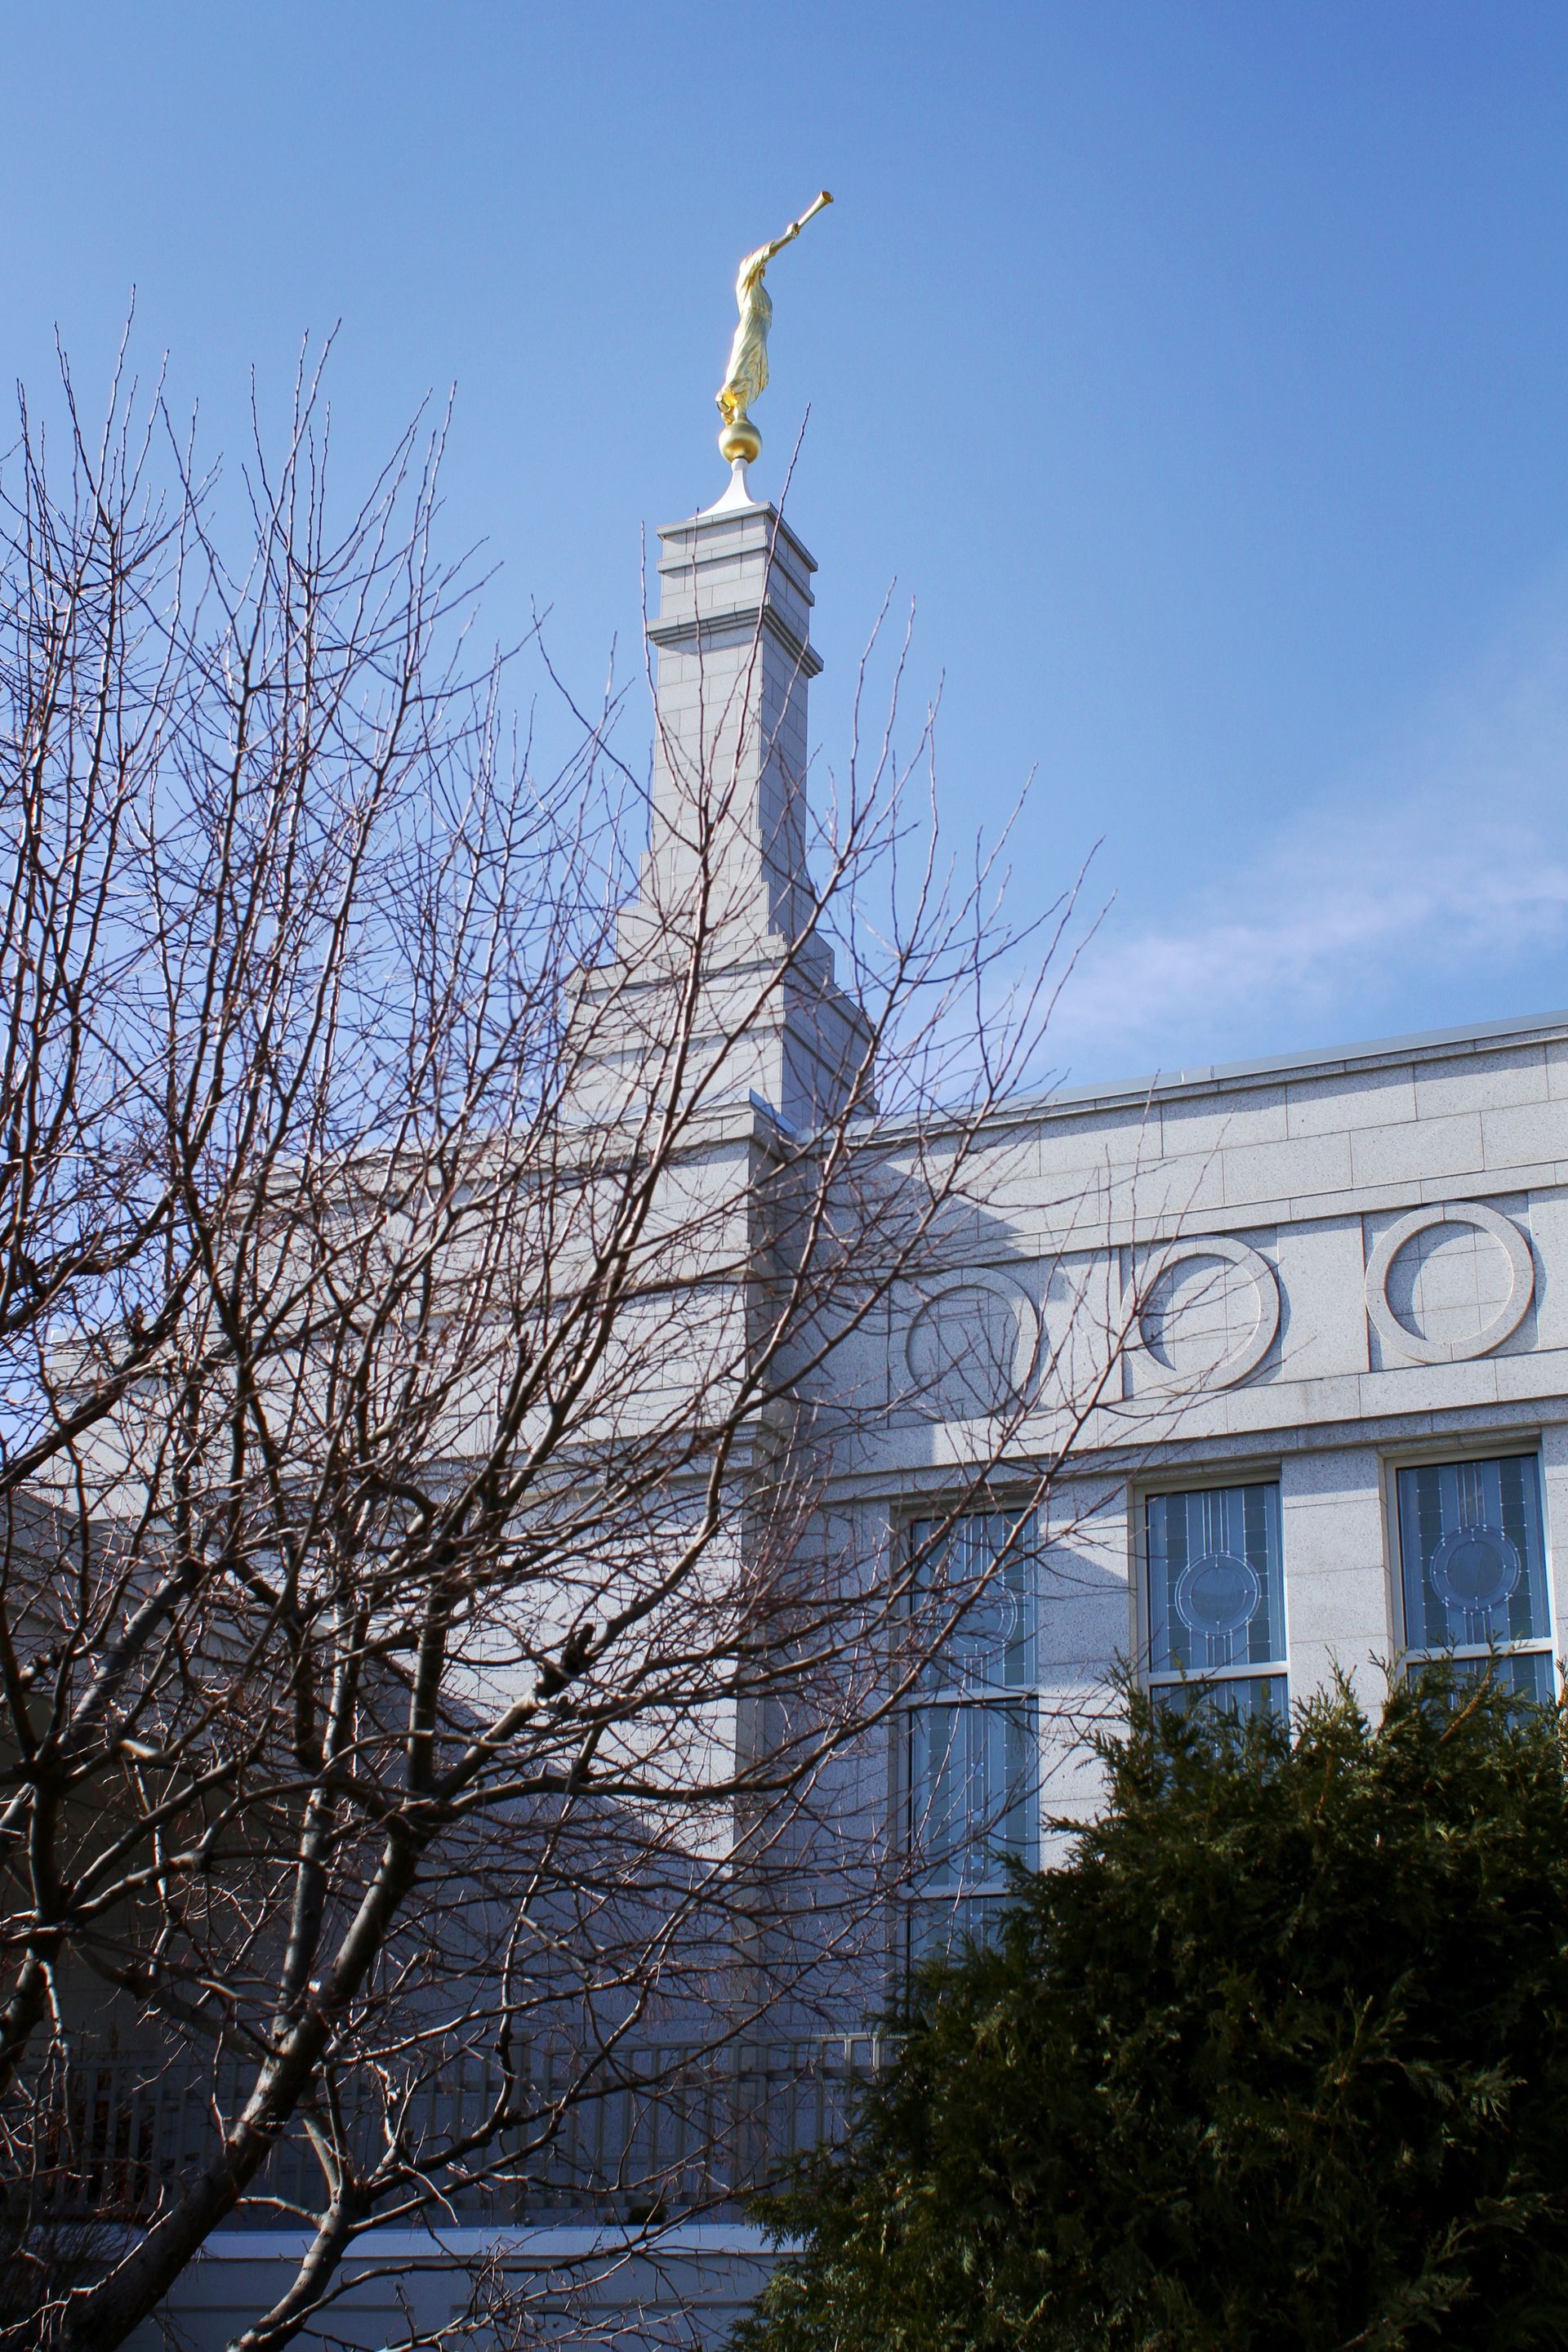 A side view of the St. Paul Minnesota Temple, including the spire, windows, and scenery.